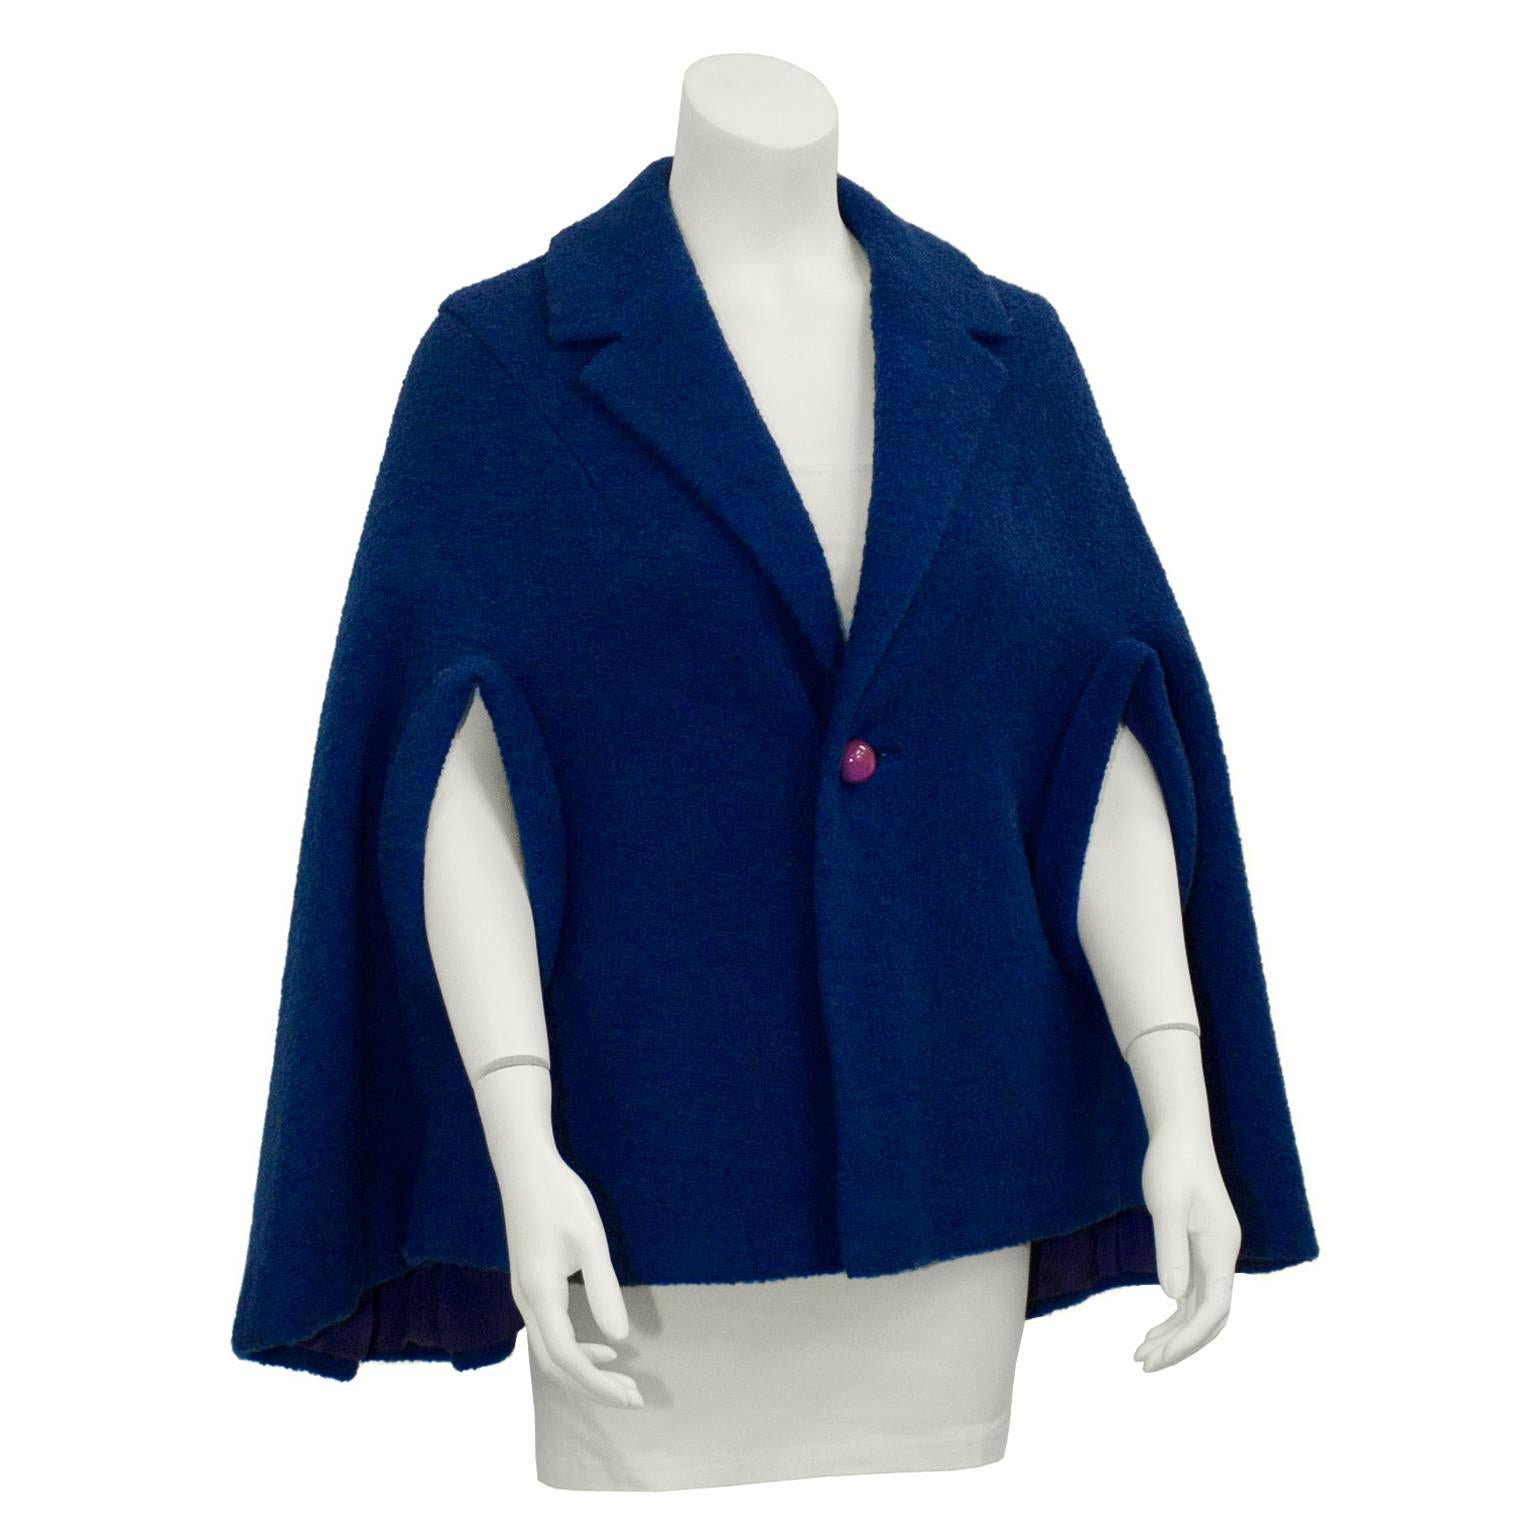 This anonymous blue boucle wool cape dates from the mid 1950's. It features a notched collar with a single button closure at center. Pink sphere button adds an adorable pop of color. A-line shape with pronounced seamed slits for arms. Excellent